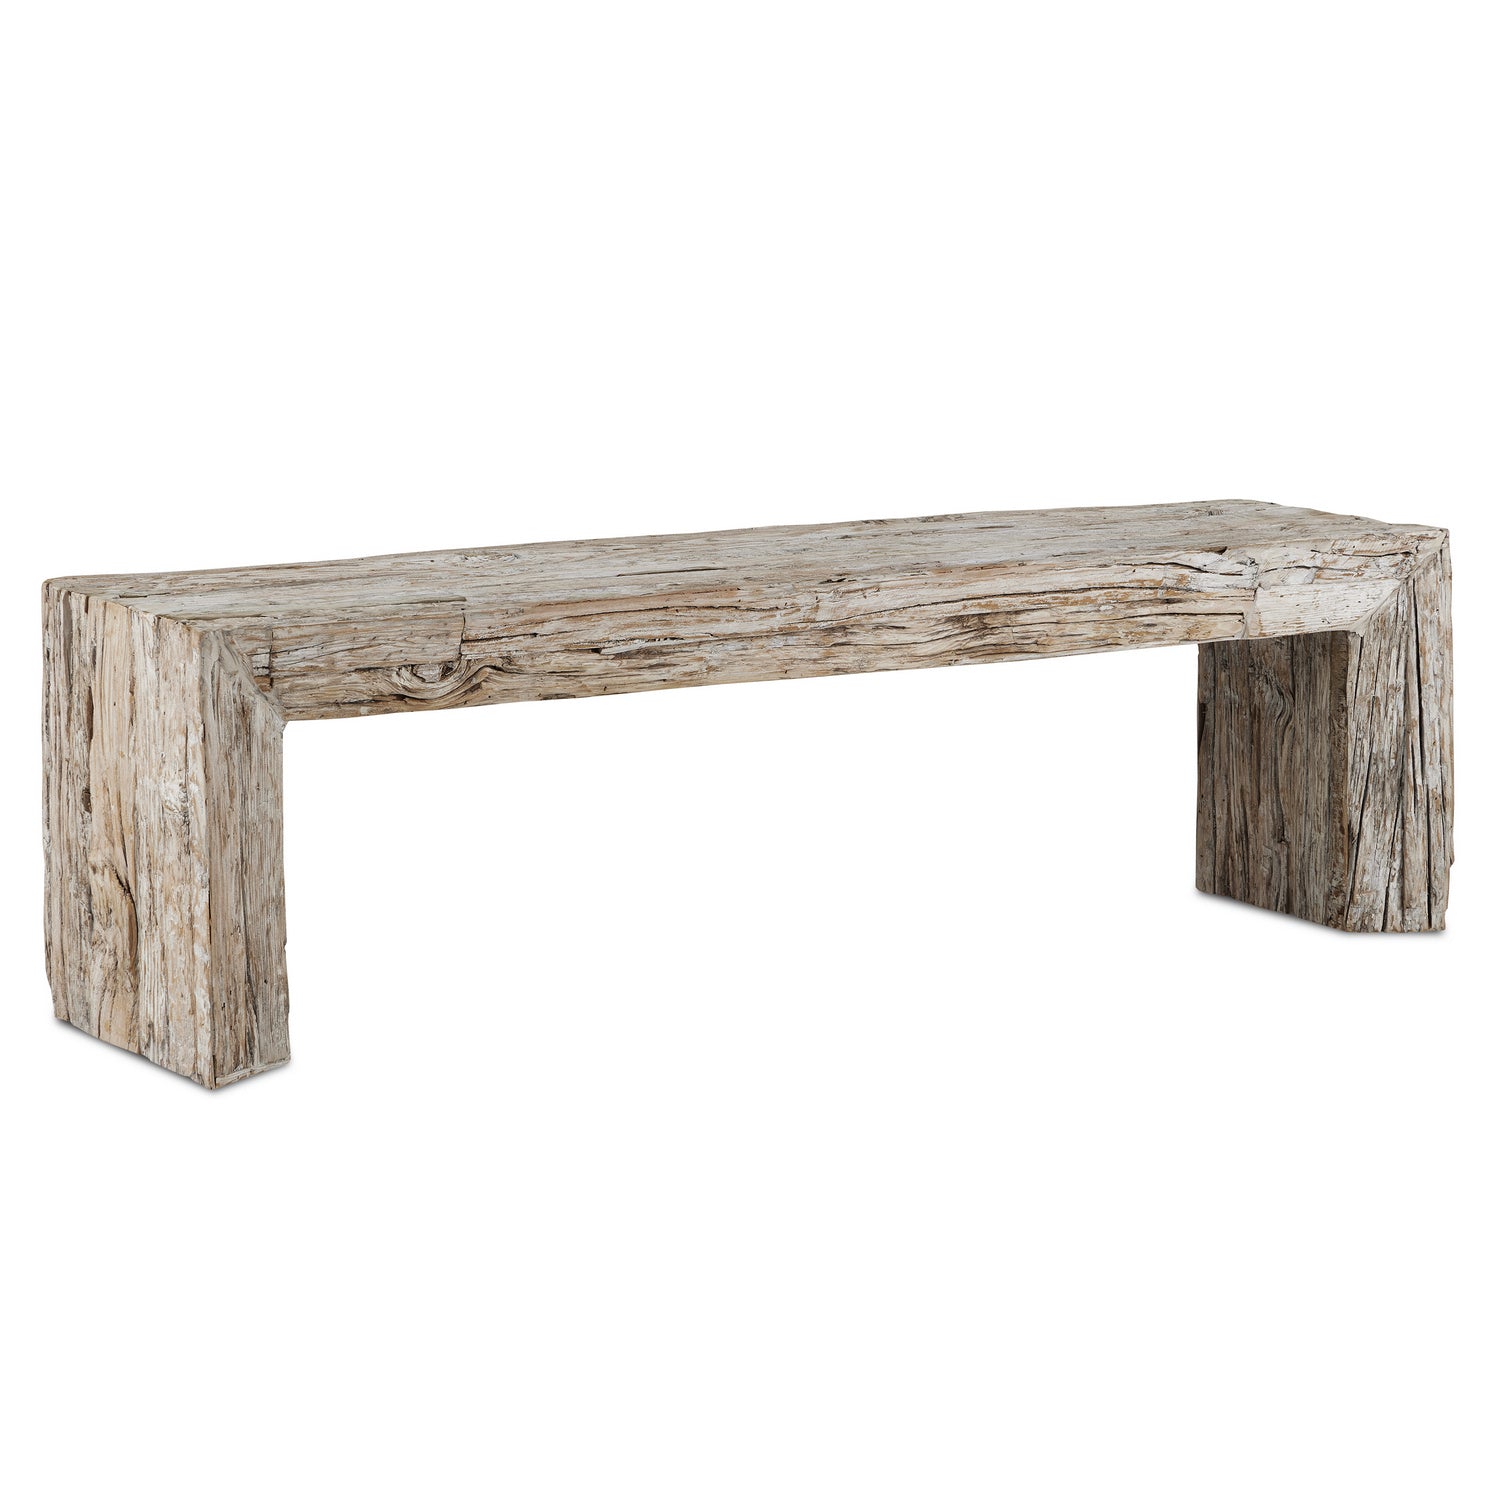 Bench from the Kanor collection in Whitewash finish